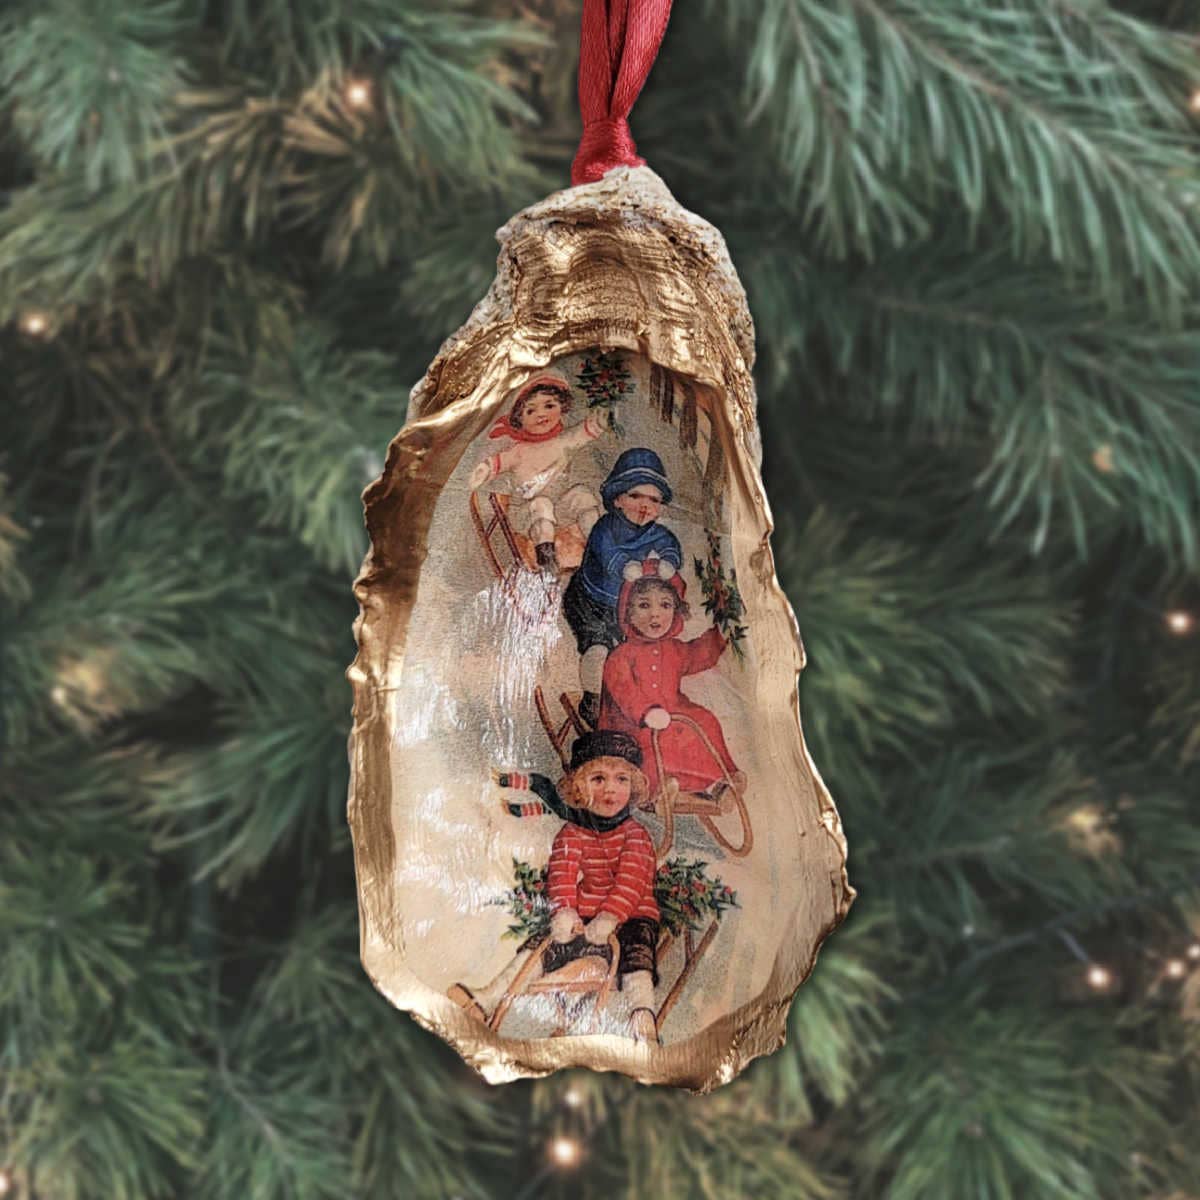 Oyster Shell Christmas Ornament  | Sledding | Algiers Point Oyster Co.